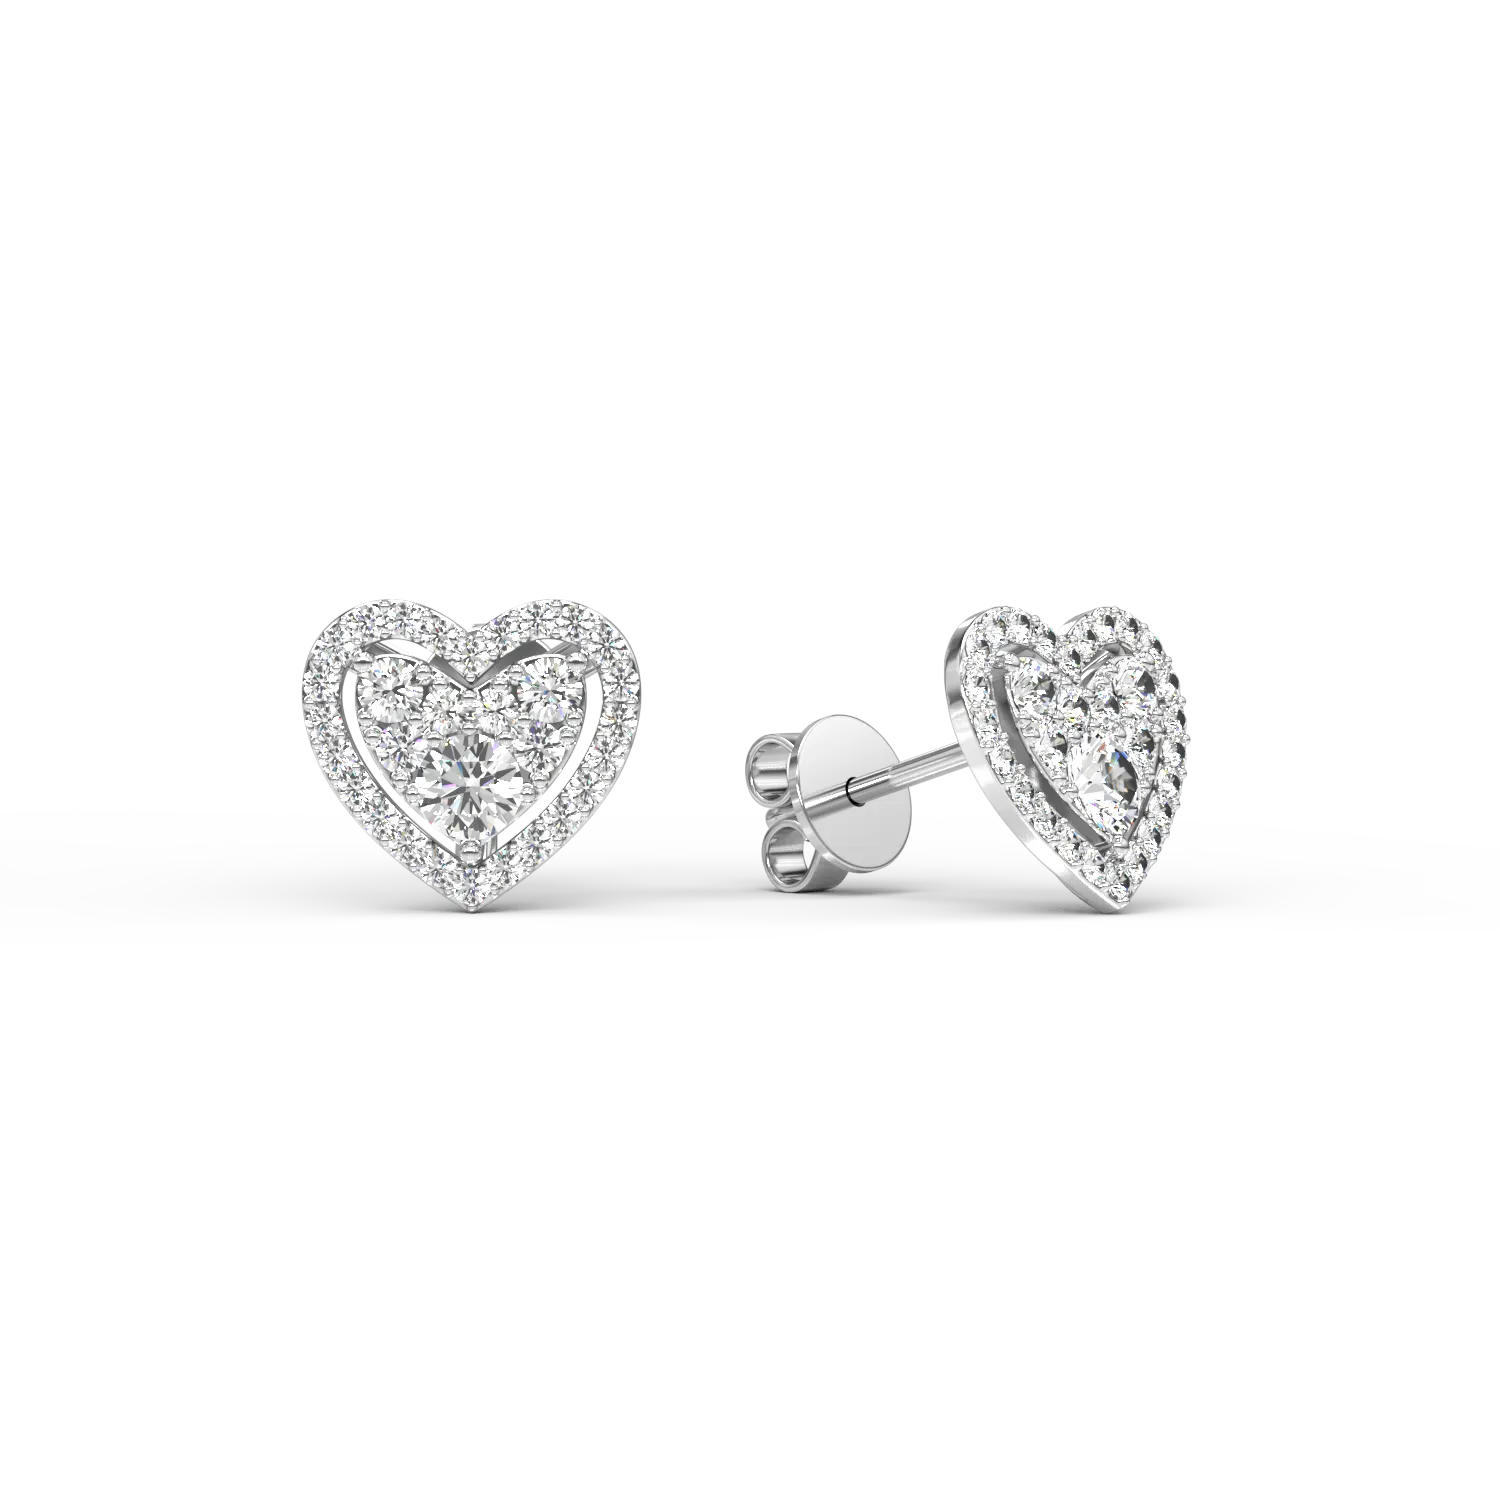 18K white gold heart earrings with 0.5ct diamonds